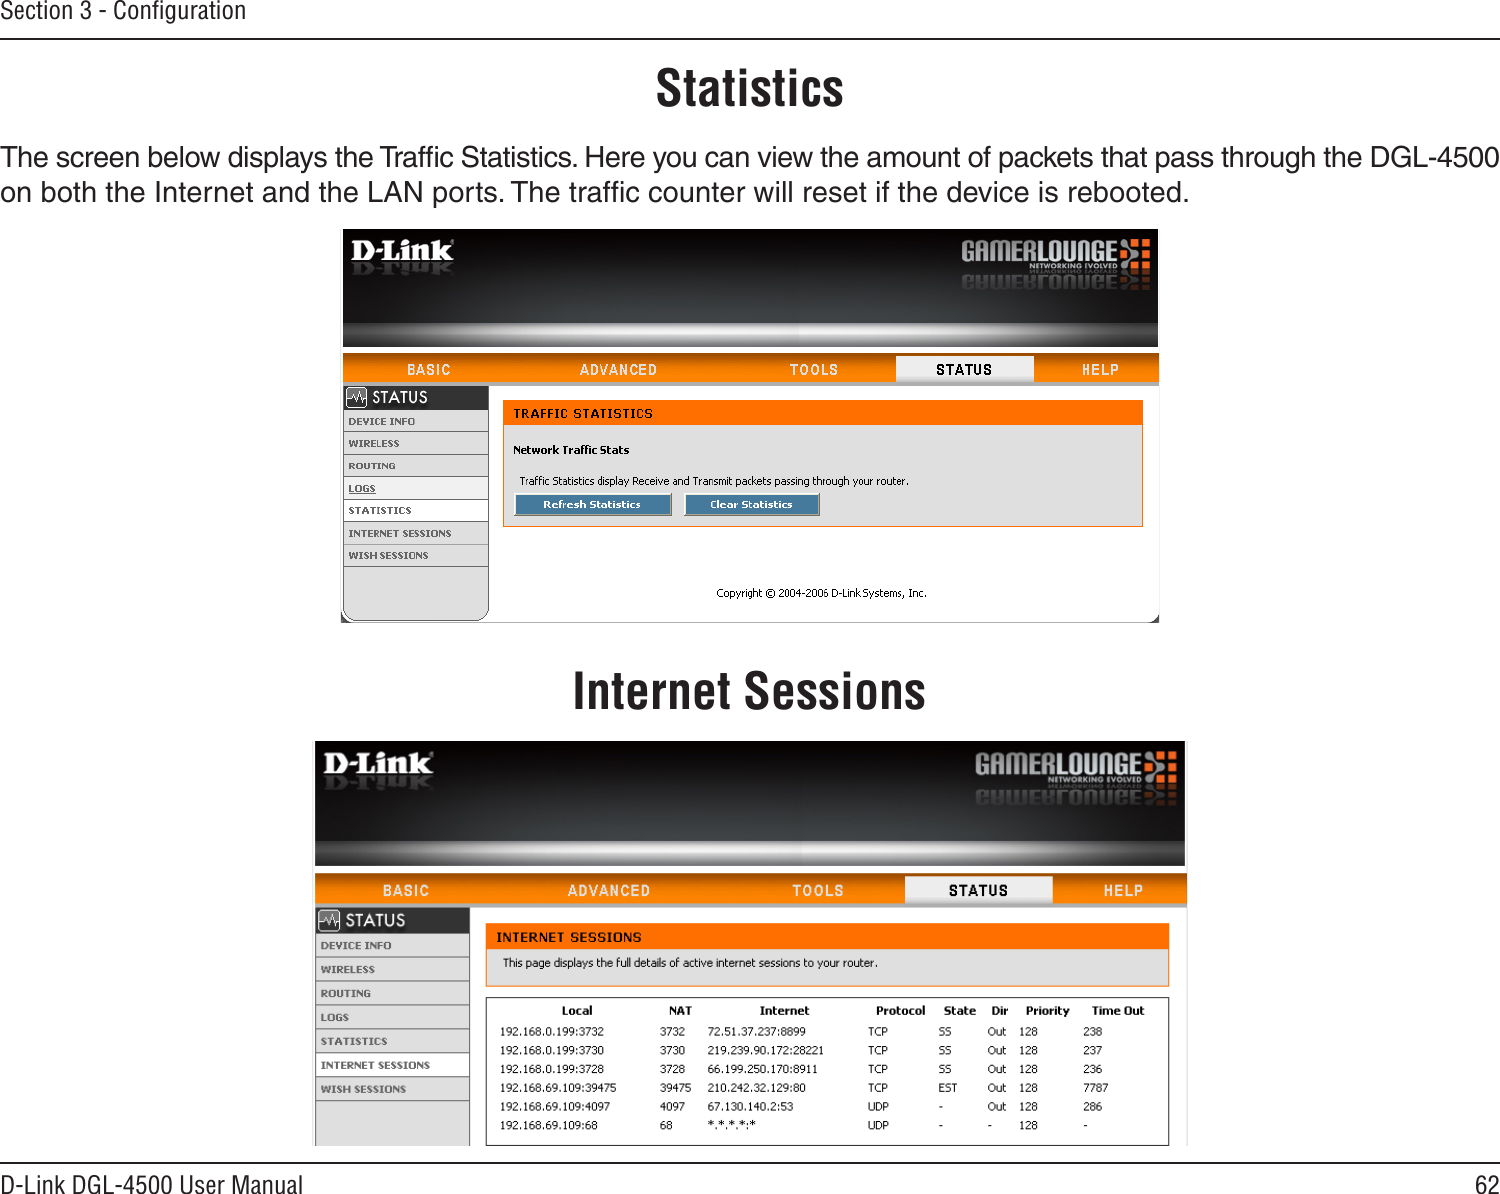 62D-Link DGL-4500 User ManualSection 3 - ConﬁgurationStatisticsThe screen below displays the Trafﬁc Statistics. Here you can view the amount of packets that pass through the DGL-4500 on both the Internet and the LAN ports. The trafﬁc counter will reset if the device is rebooted.Internet Sessions